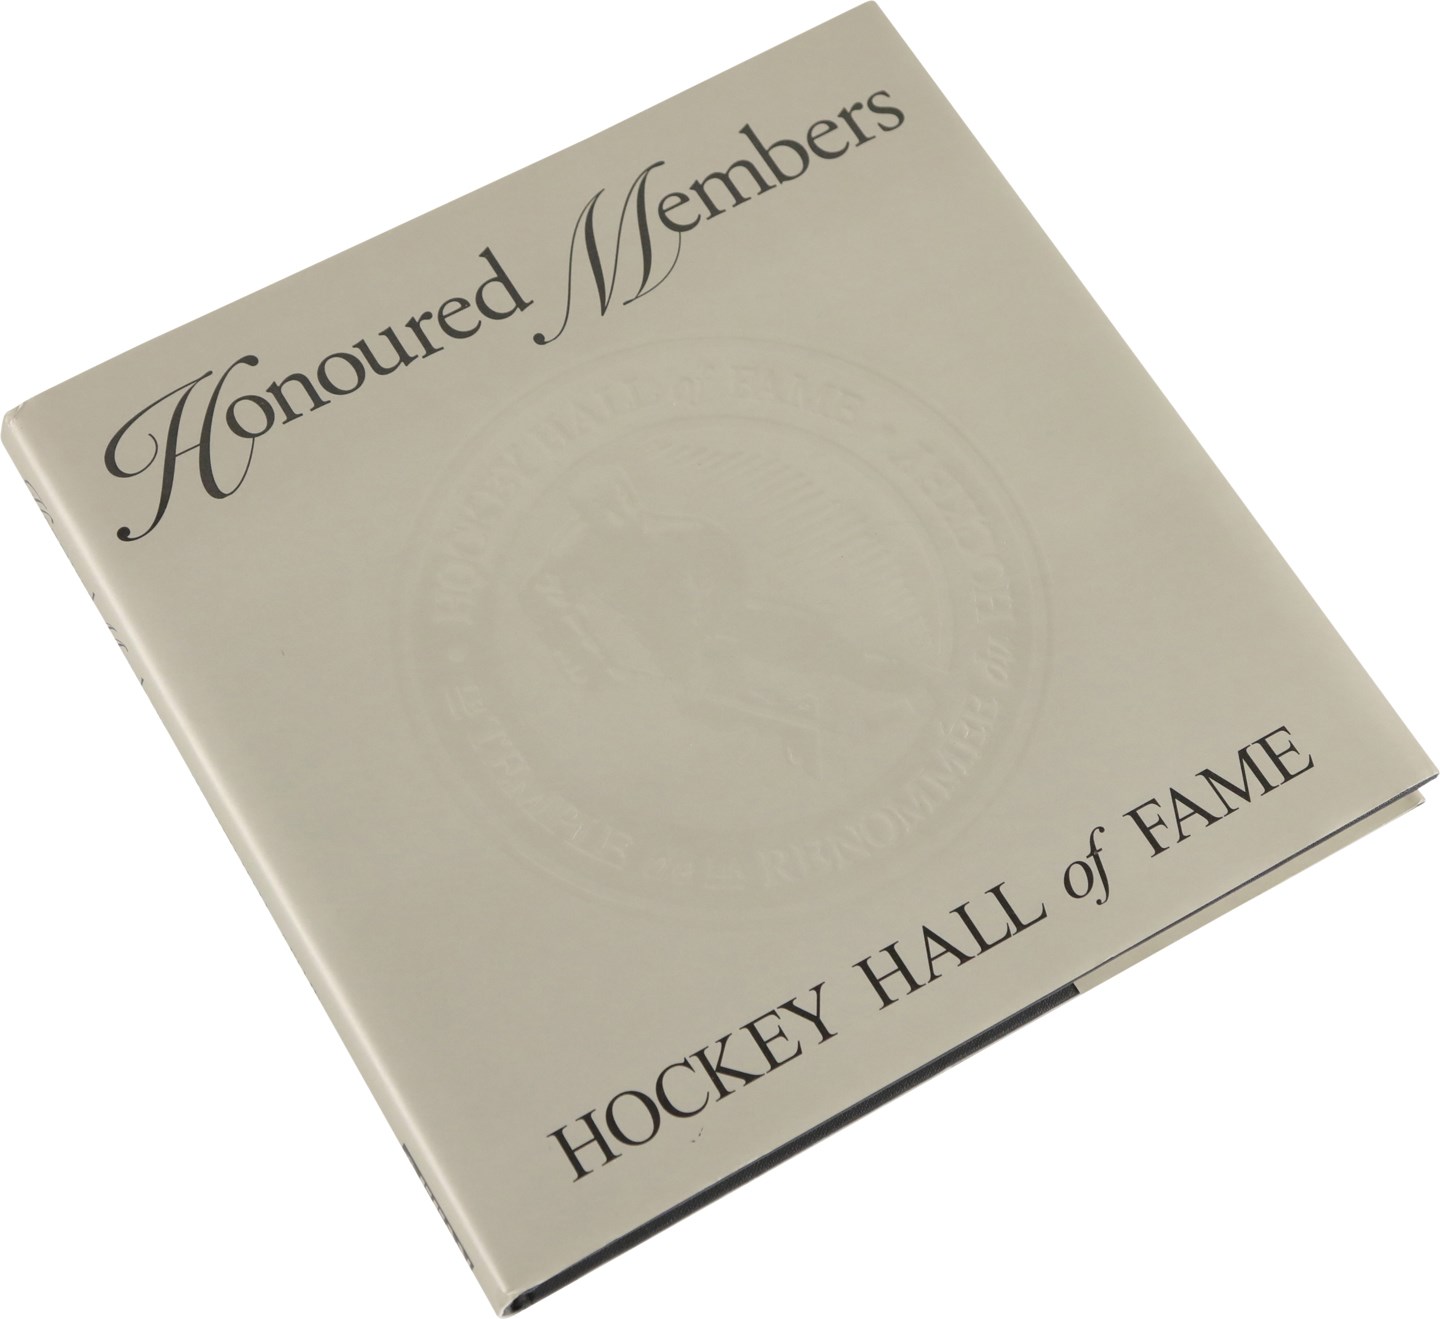 - Hockey Hall of Fame Book Signed by 19 Members Including Howe, Hull and Lemieux (JSA)